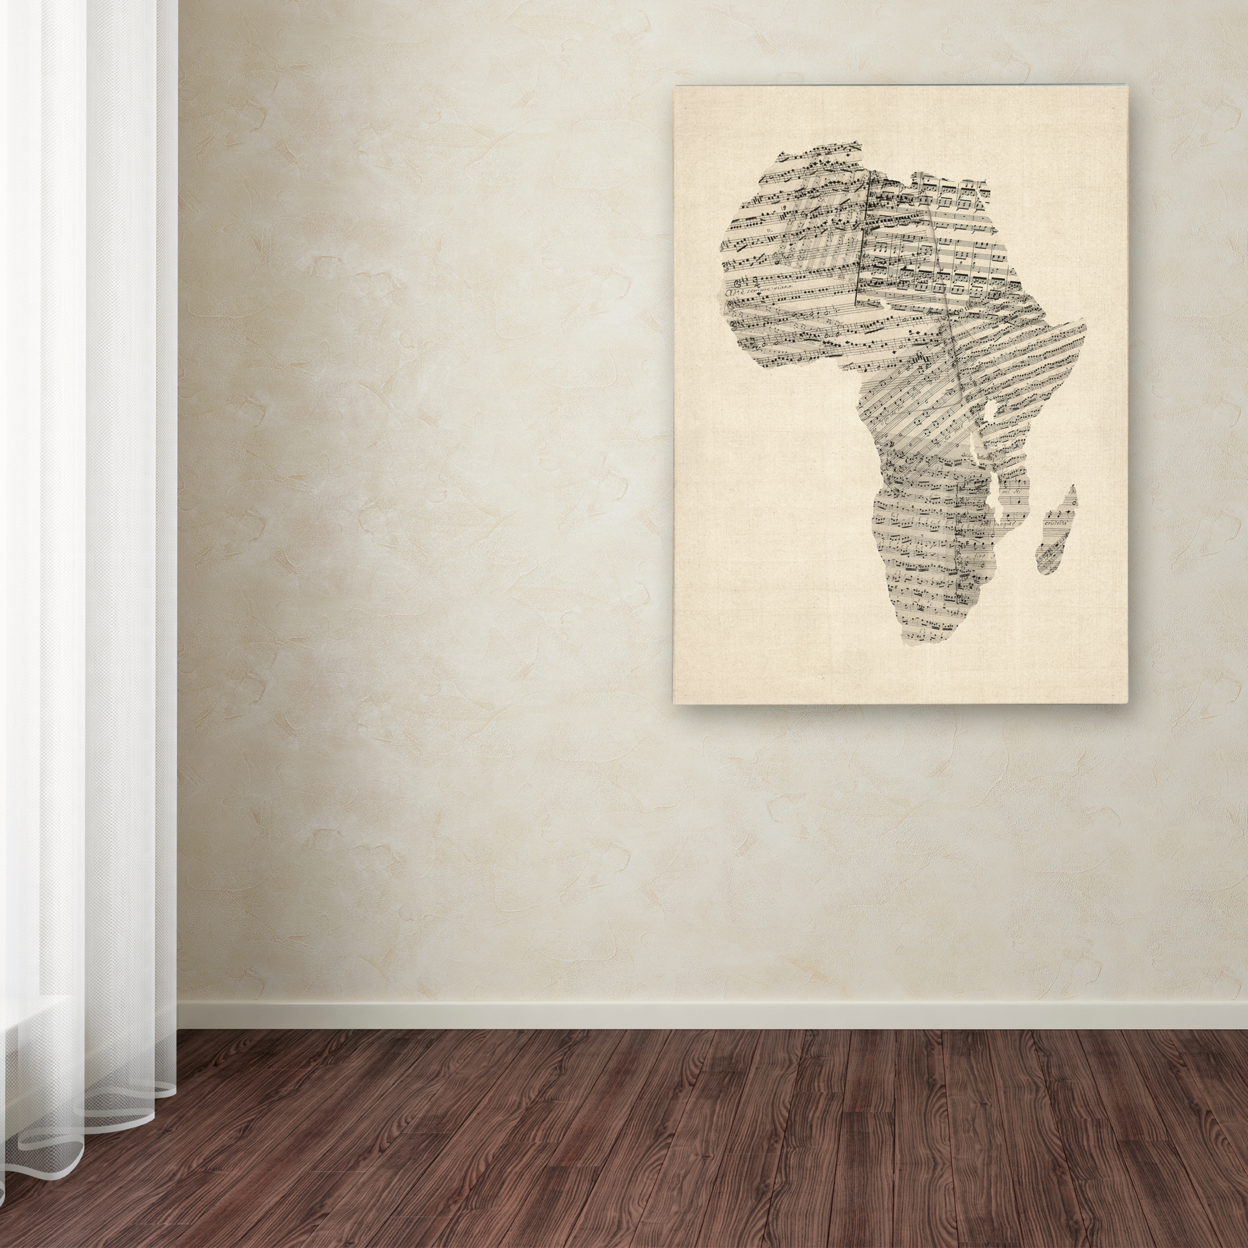 Michael Tompsett 'Old Sheet Music Map Of Africa' Canvas Wall Art 35 X 47 Inches